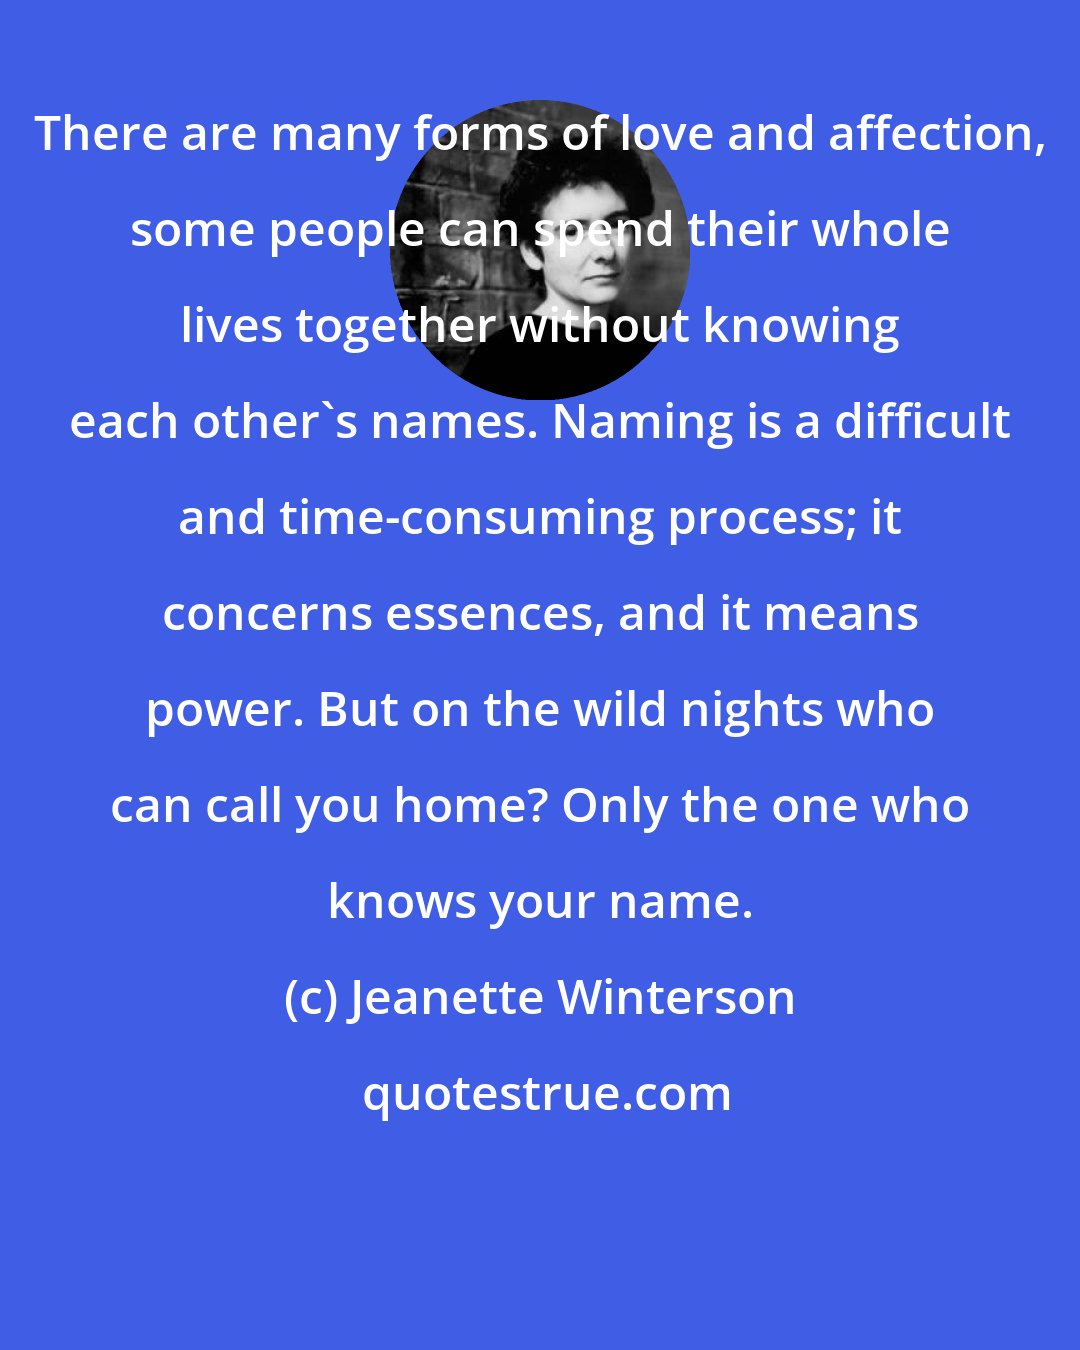 Jeanette Winterson: There are many forms of love and affection, some people can spend their whole lives together without knowing each other's names. Naming is a difficult and time-consuming process; it concerns essences, and it means power. But on the wild nights who can call you home? Only the one who knows your name.